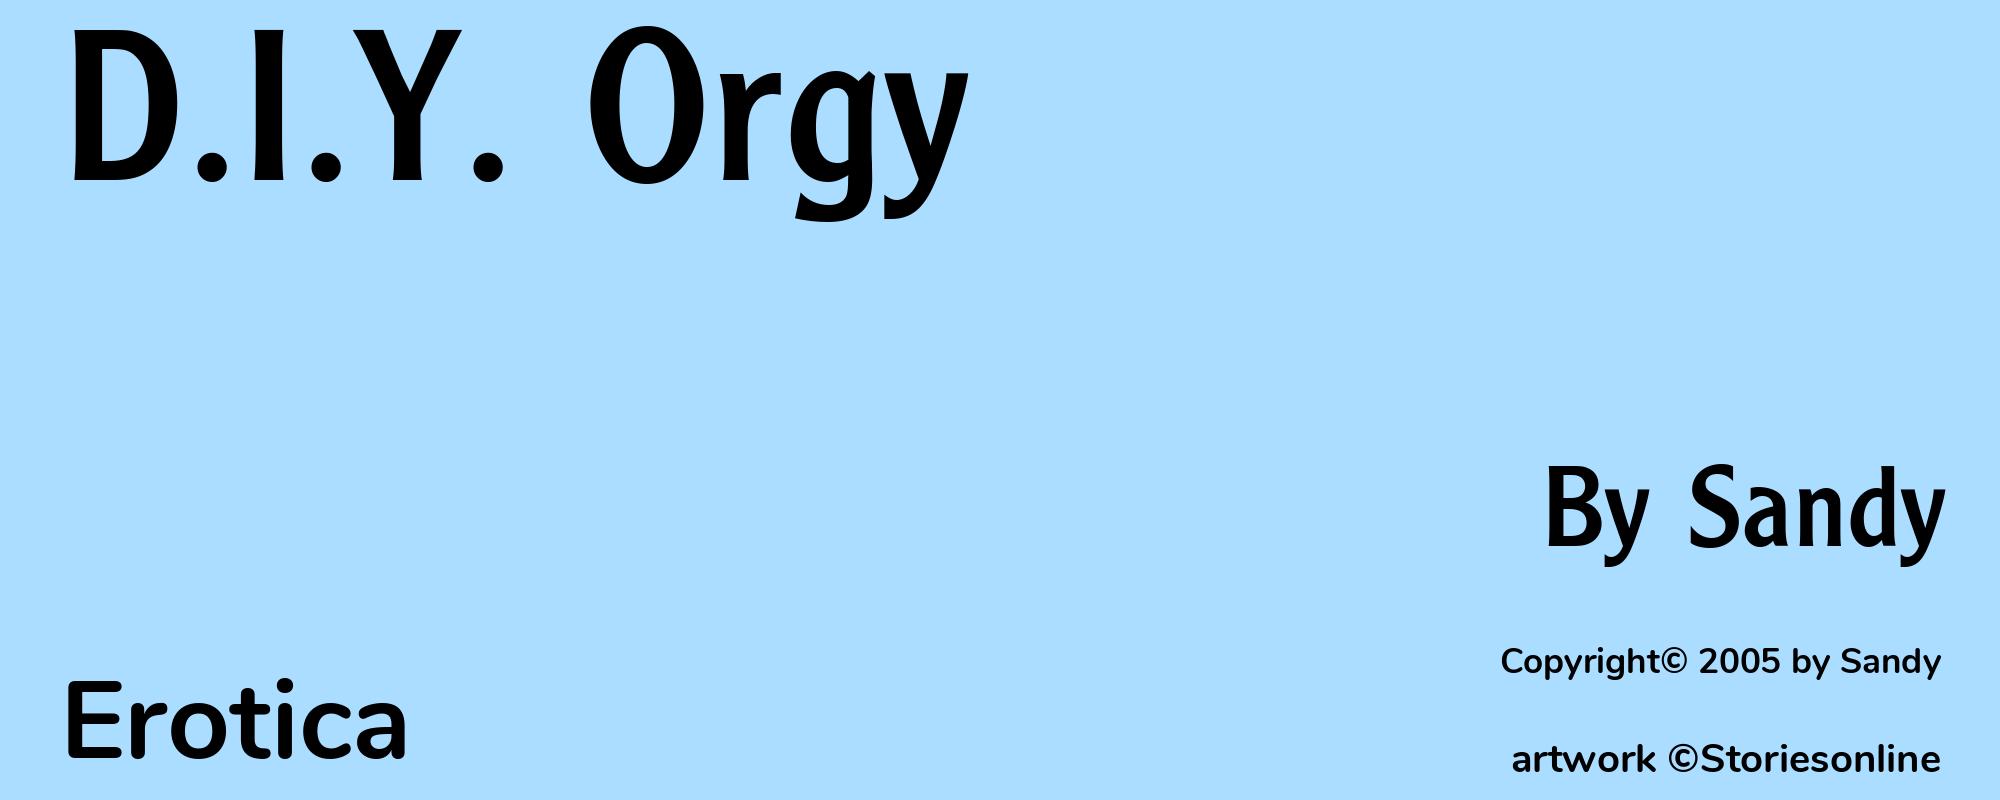 D.I.Y. Orgy - Cover